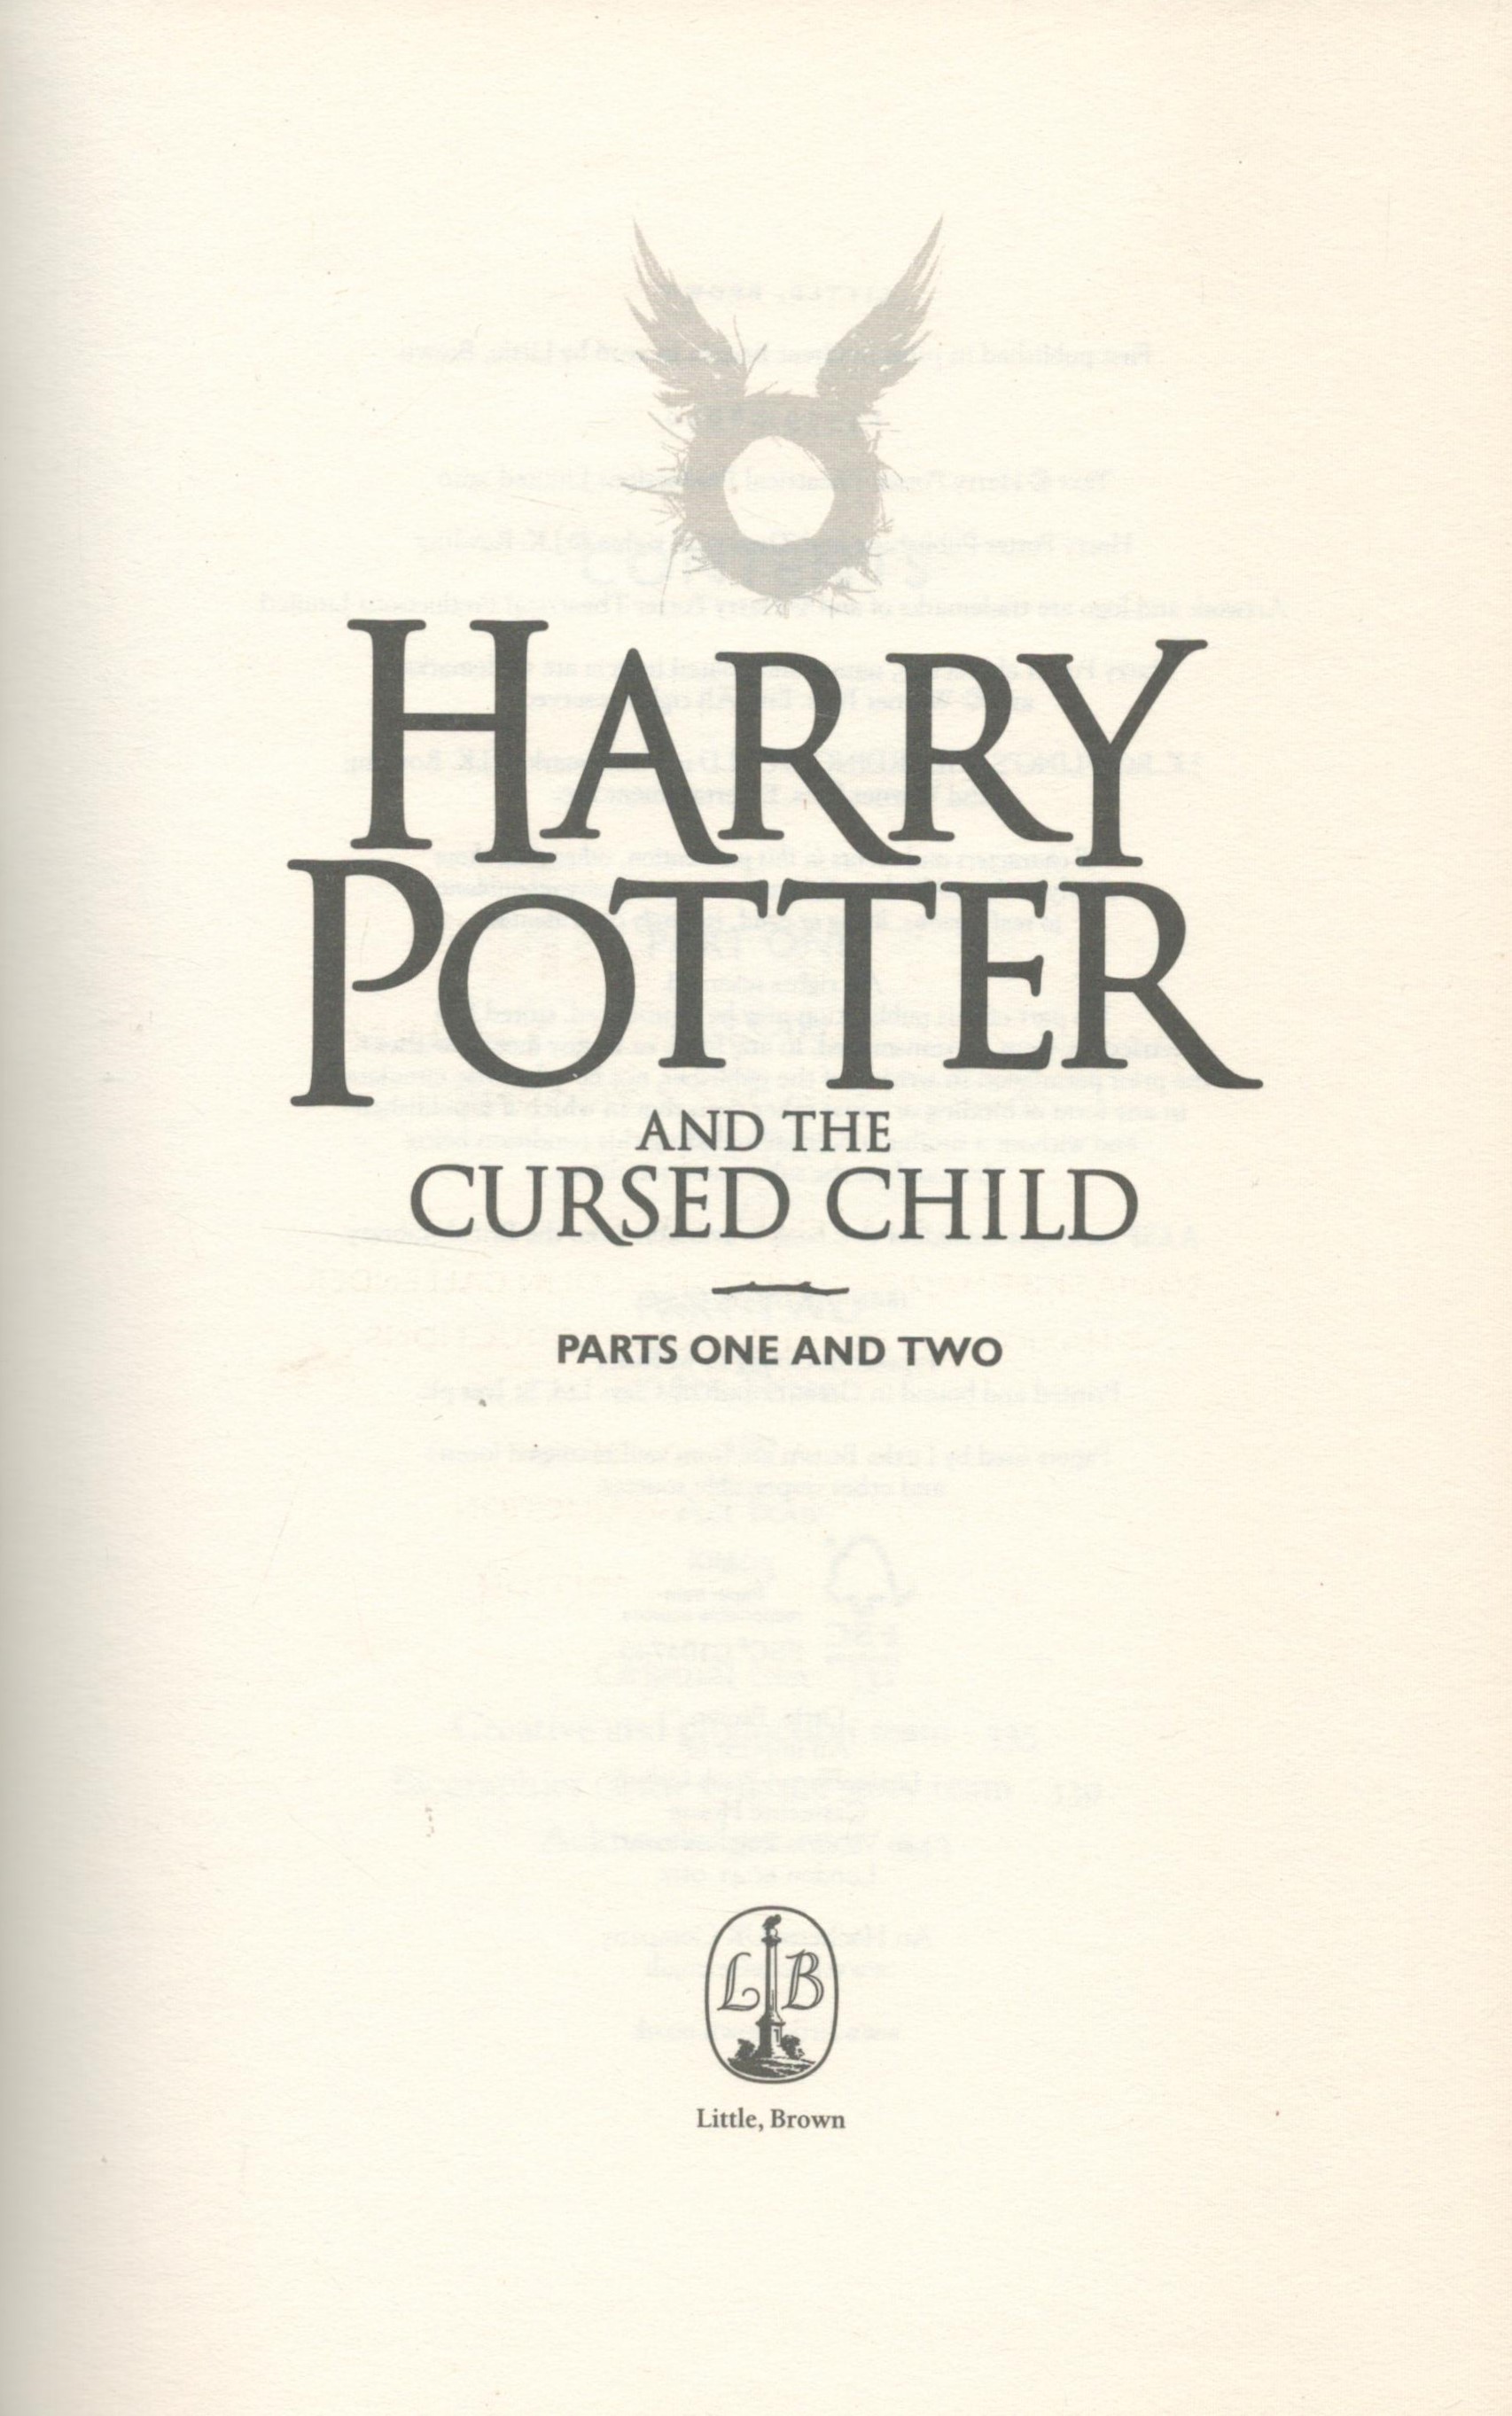 Harry Potter and the Cursed Child (Parts one and two) by J K Rowling 2016 First Edition Hardback - Image 2 of 3